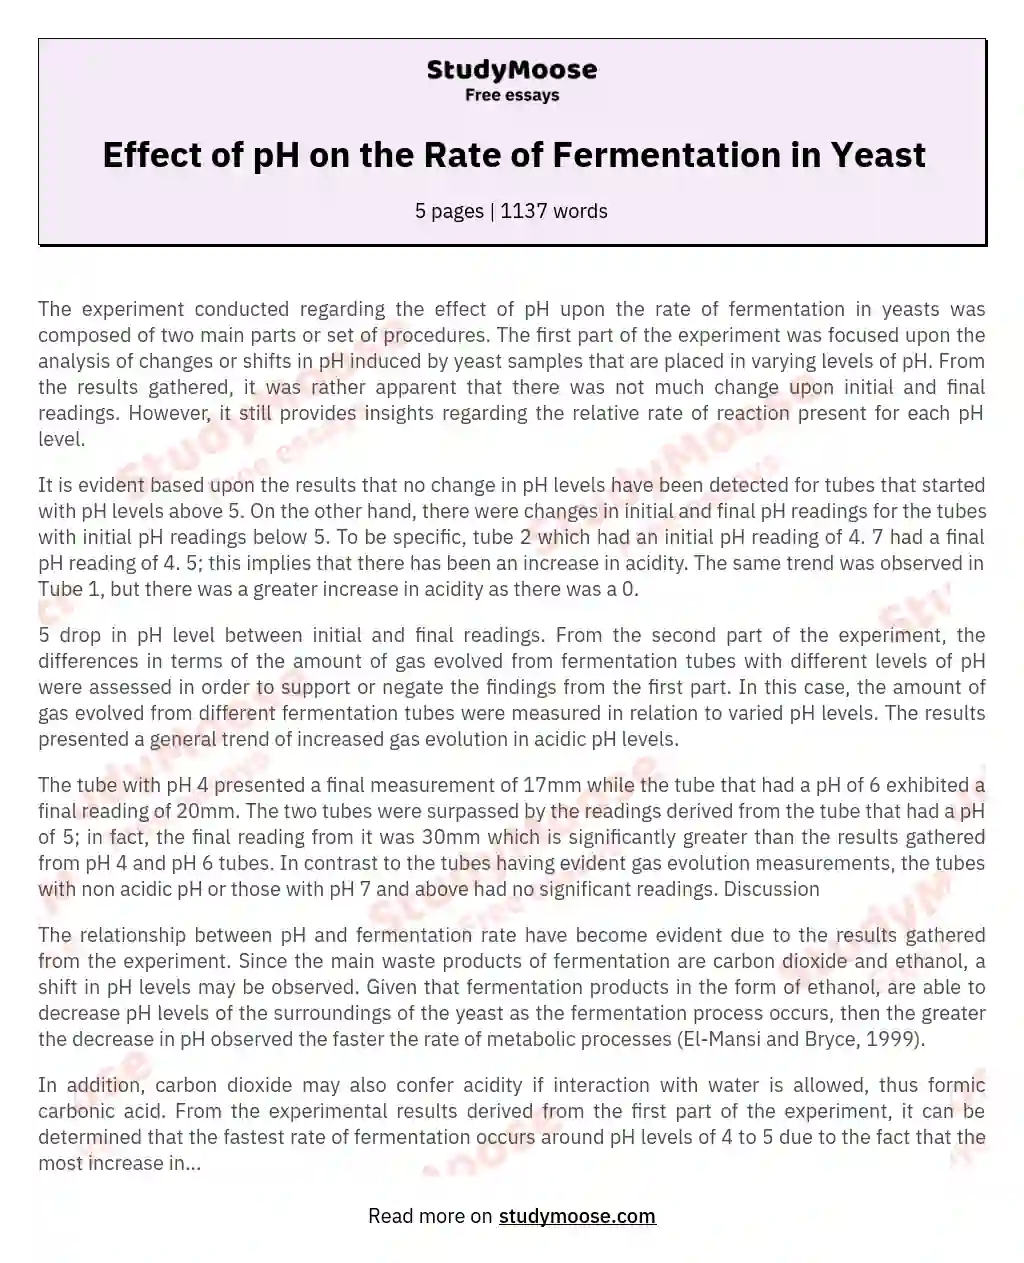 Effect of pH on the Rate of Fermentation in Yeast essay